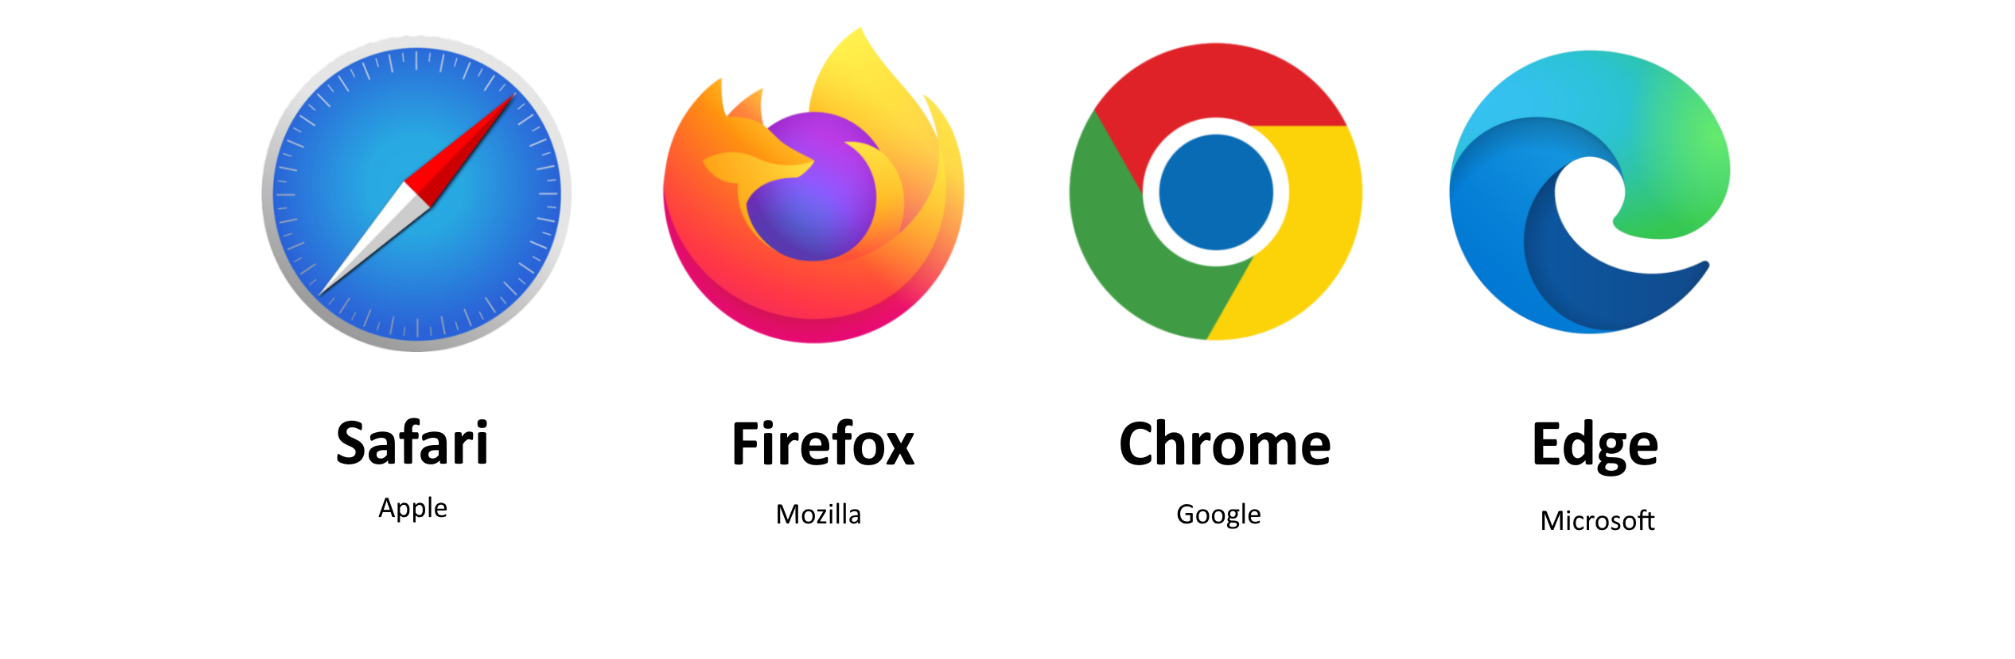 unsupported browser logos